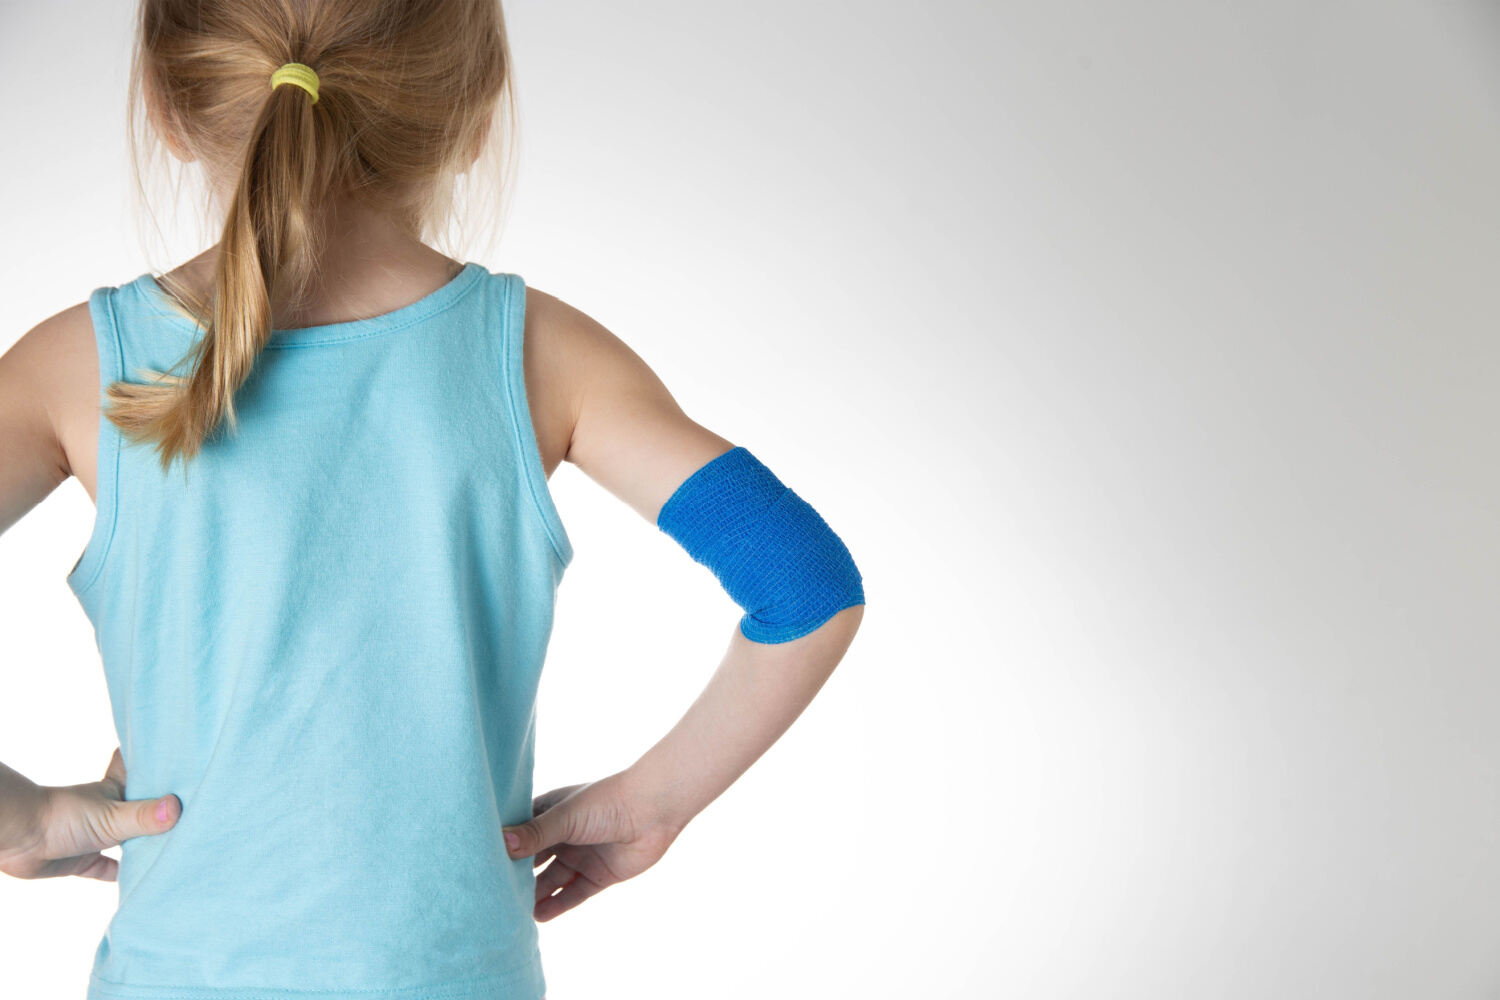 A kid with elastic bandage over elbow